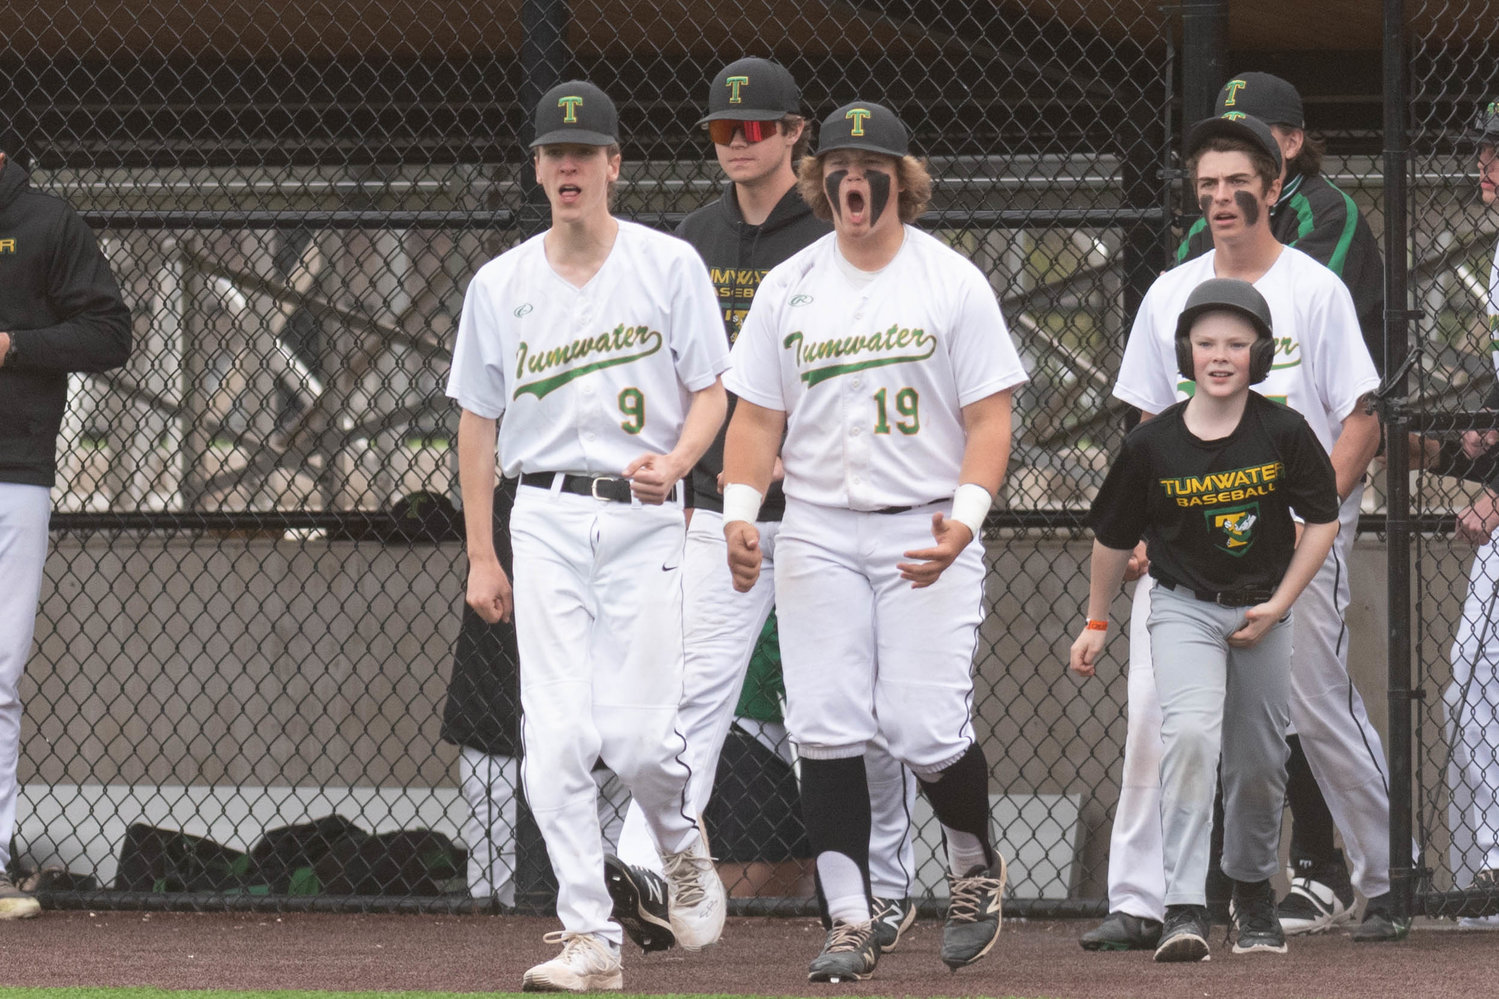 The Tumwater dugout celebrates an out against Shelton in the 2A District 4 semifinals May 11 at Ridgefield.